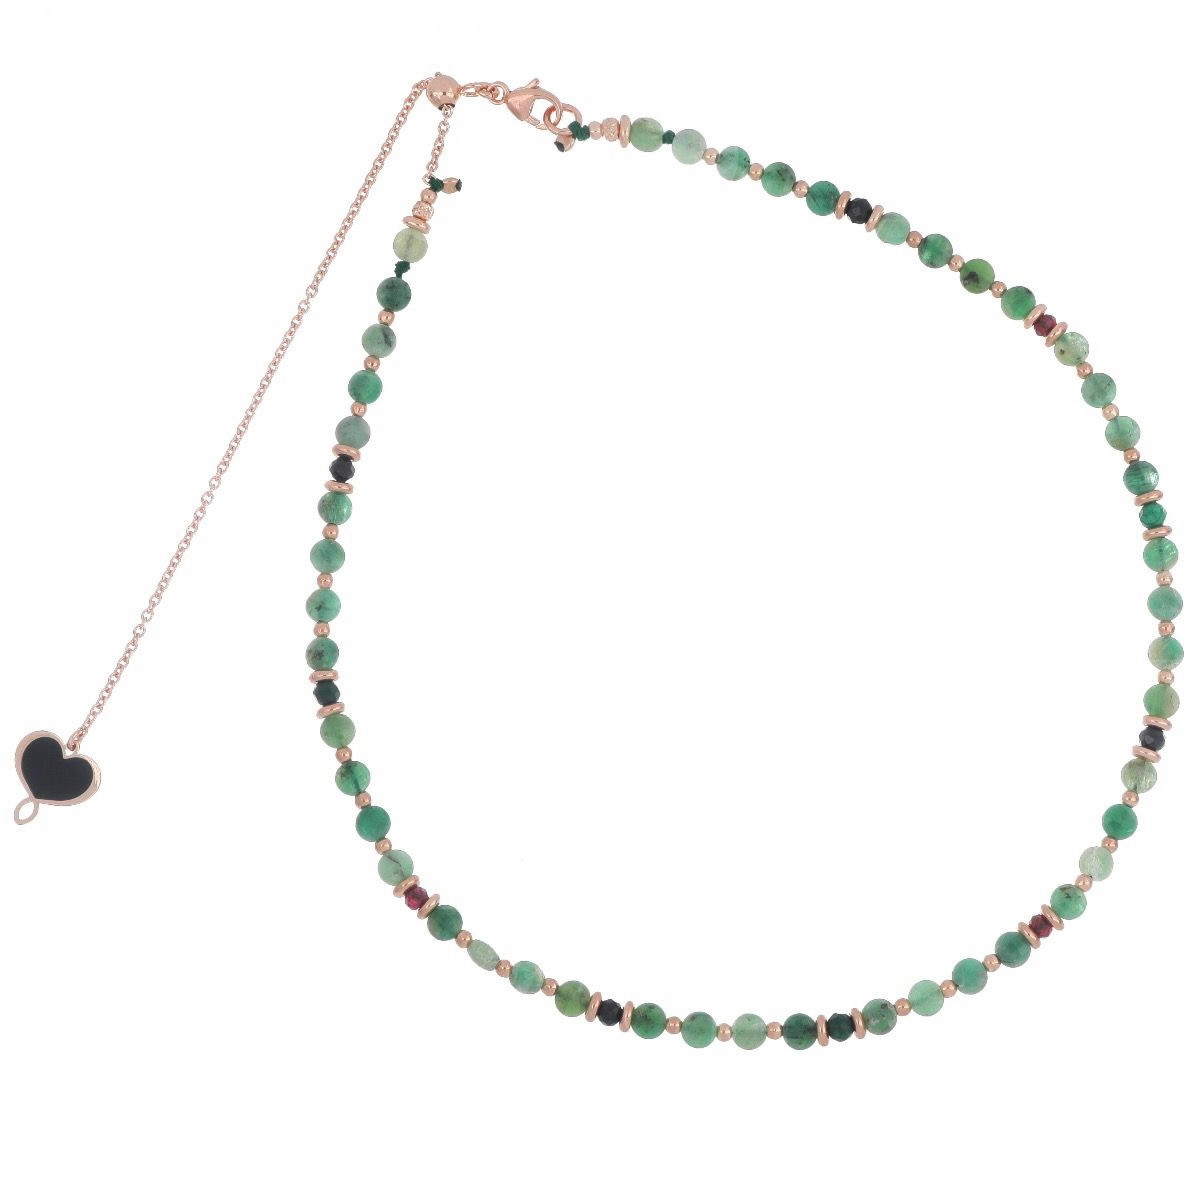 EMERALD AND SPINEL NECKLACE